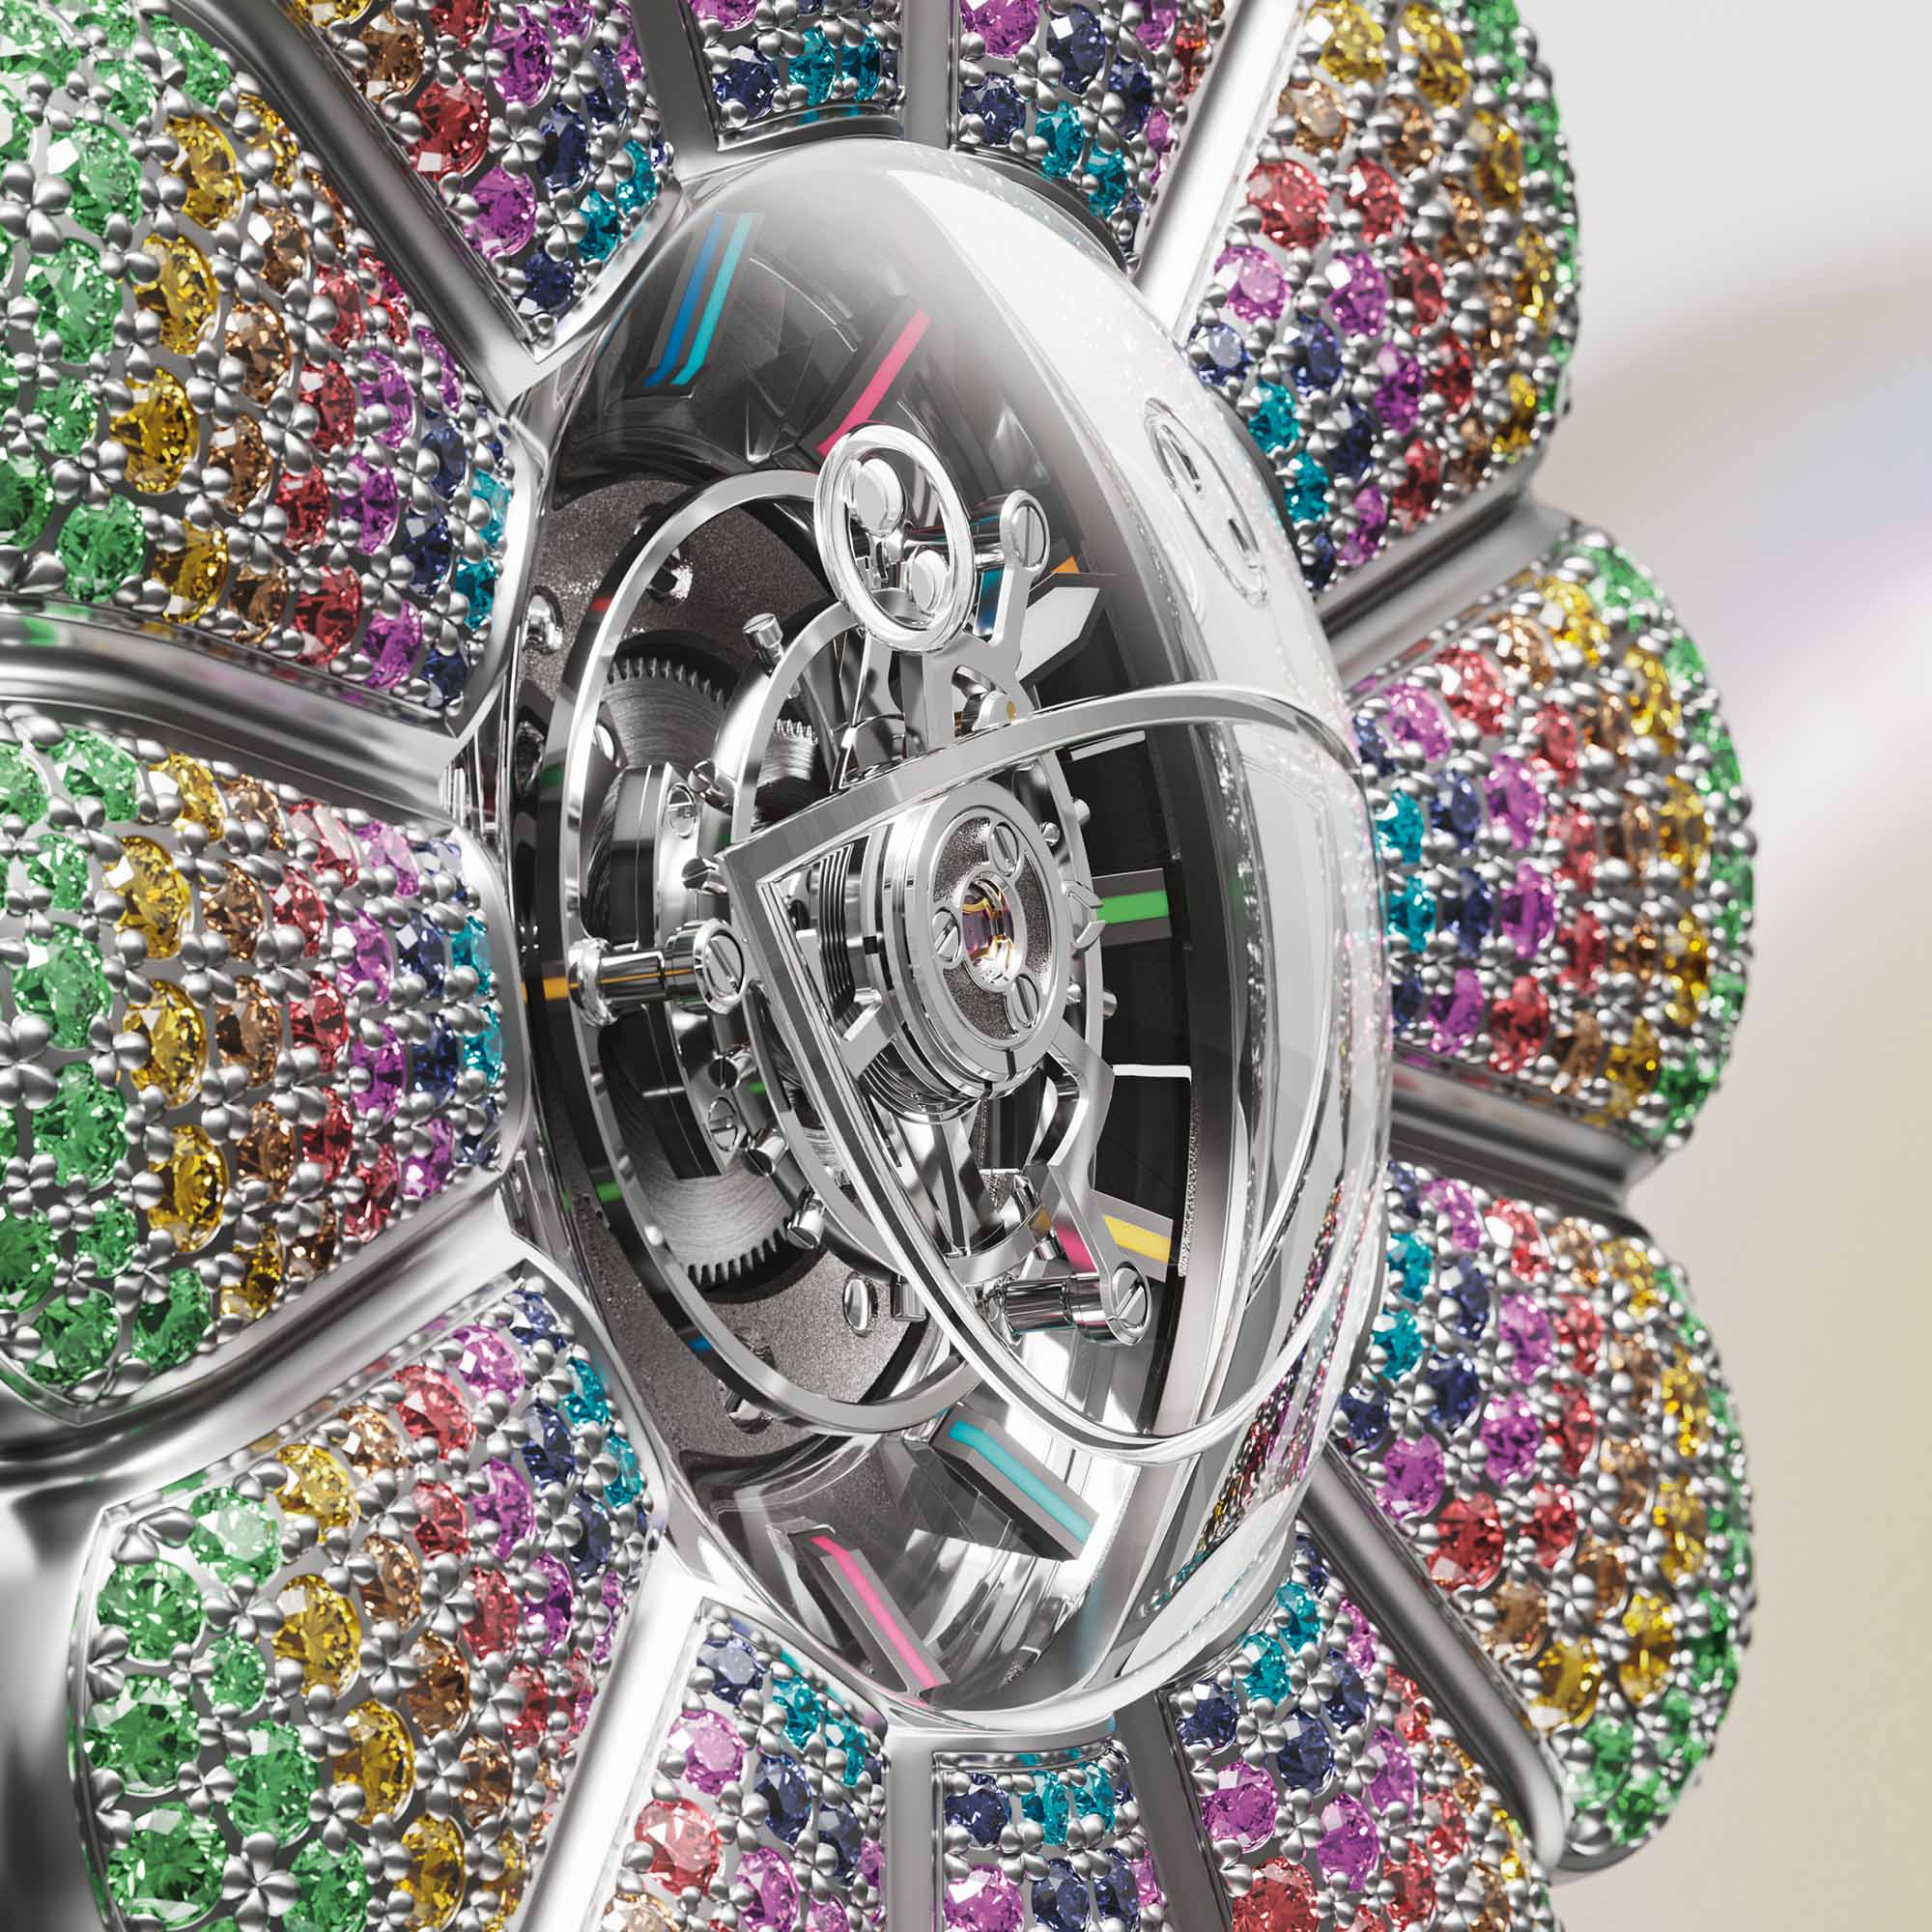 MP-15 TAKASHI MURAKAMI ONLY WATCH SAPPHIRE: A UNIQUE PIECE AND HUBLOT'S  FIRST CENTRAL FLYING TOURBILLON